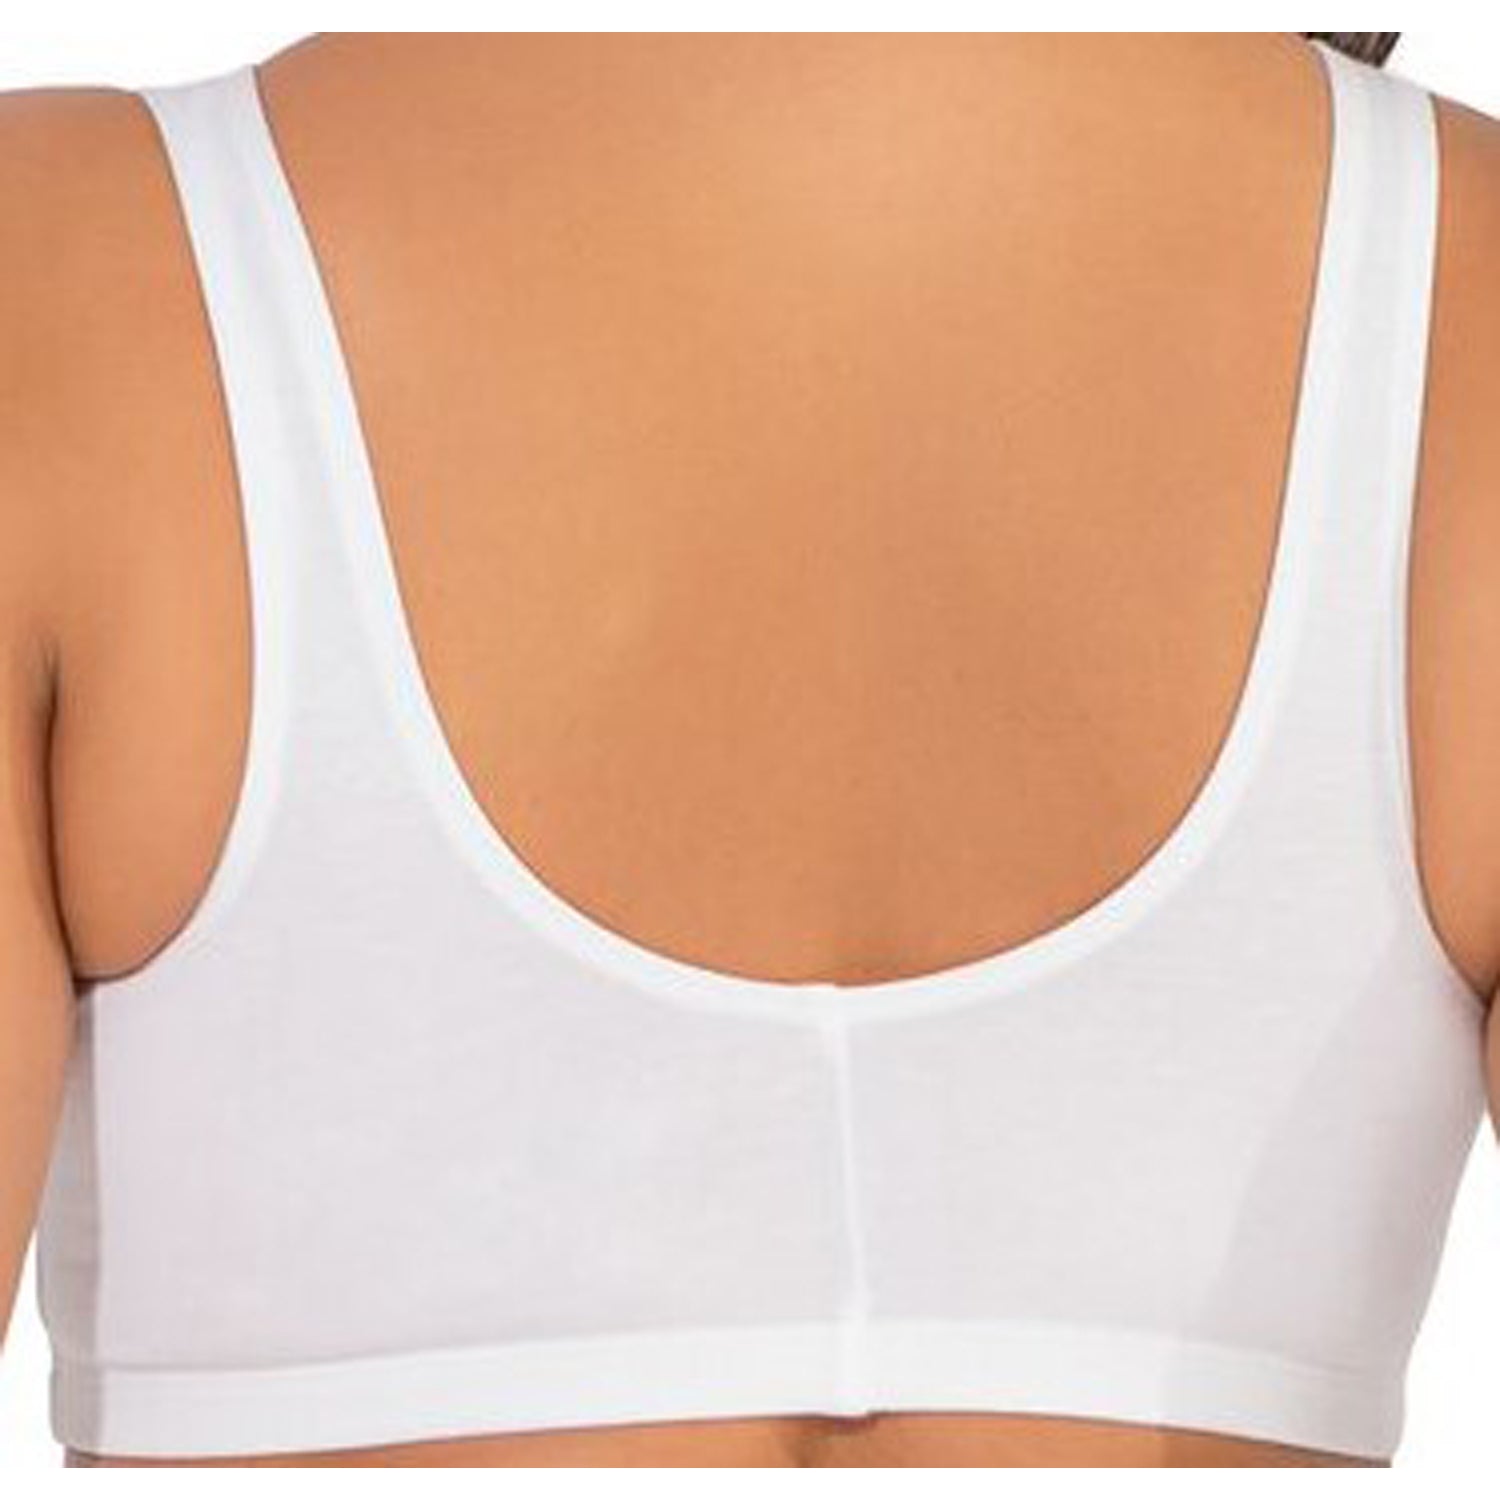 Fruit of the Loom Women's Front Closure Cotton Bra